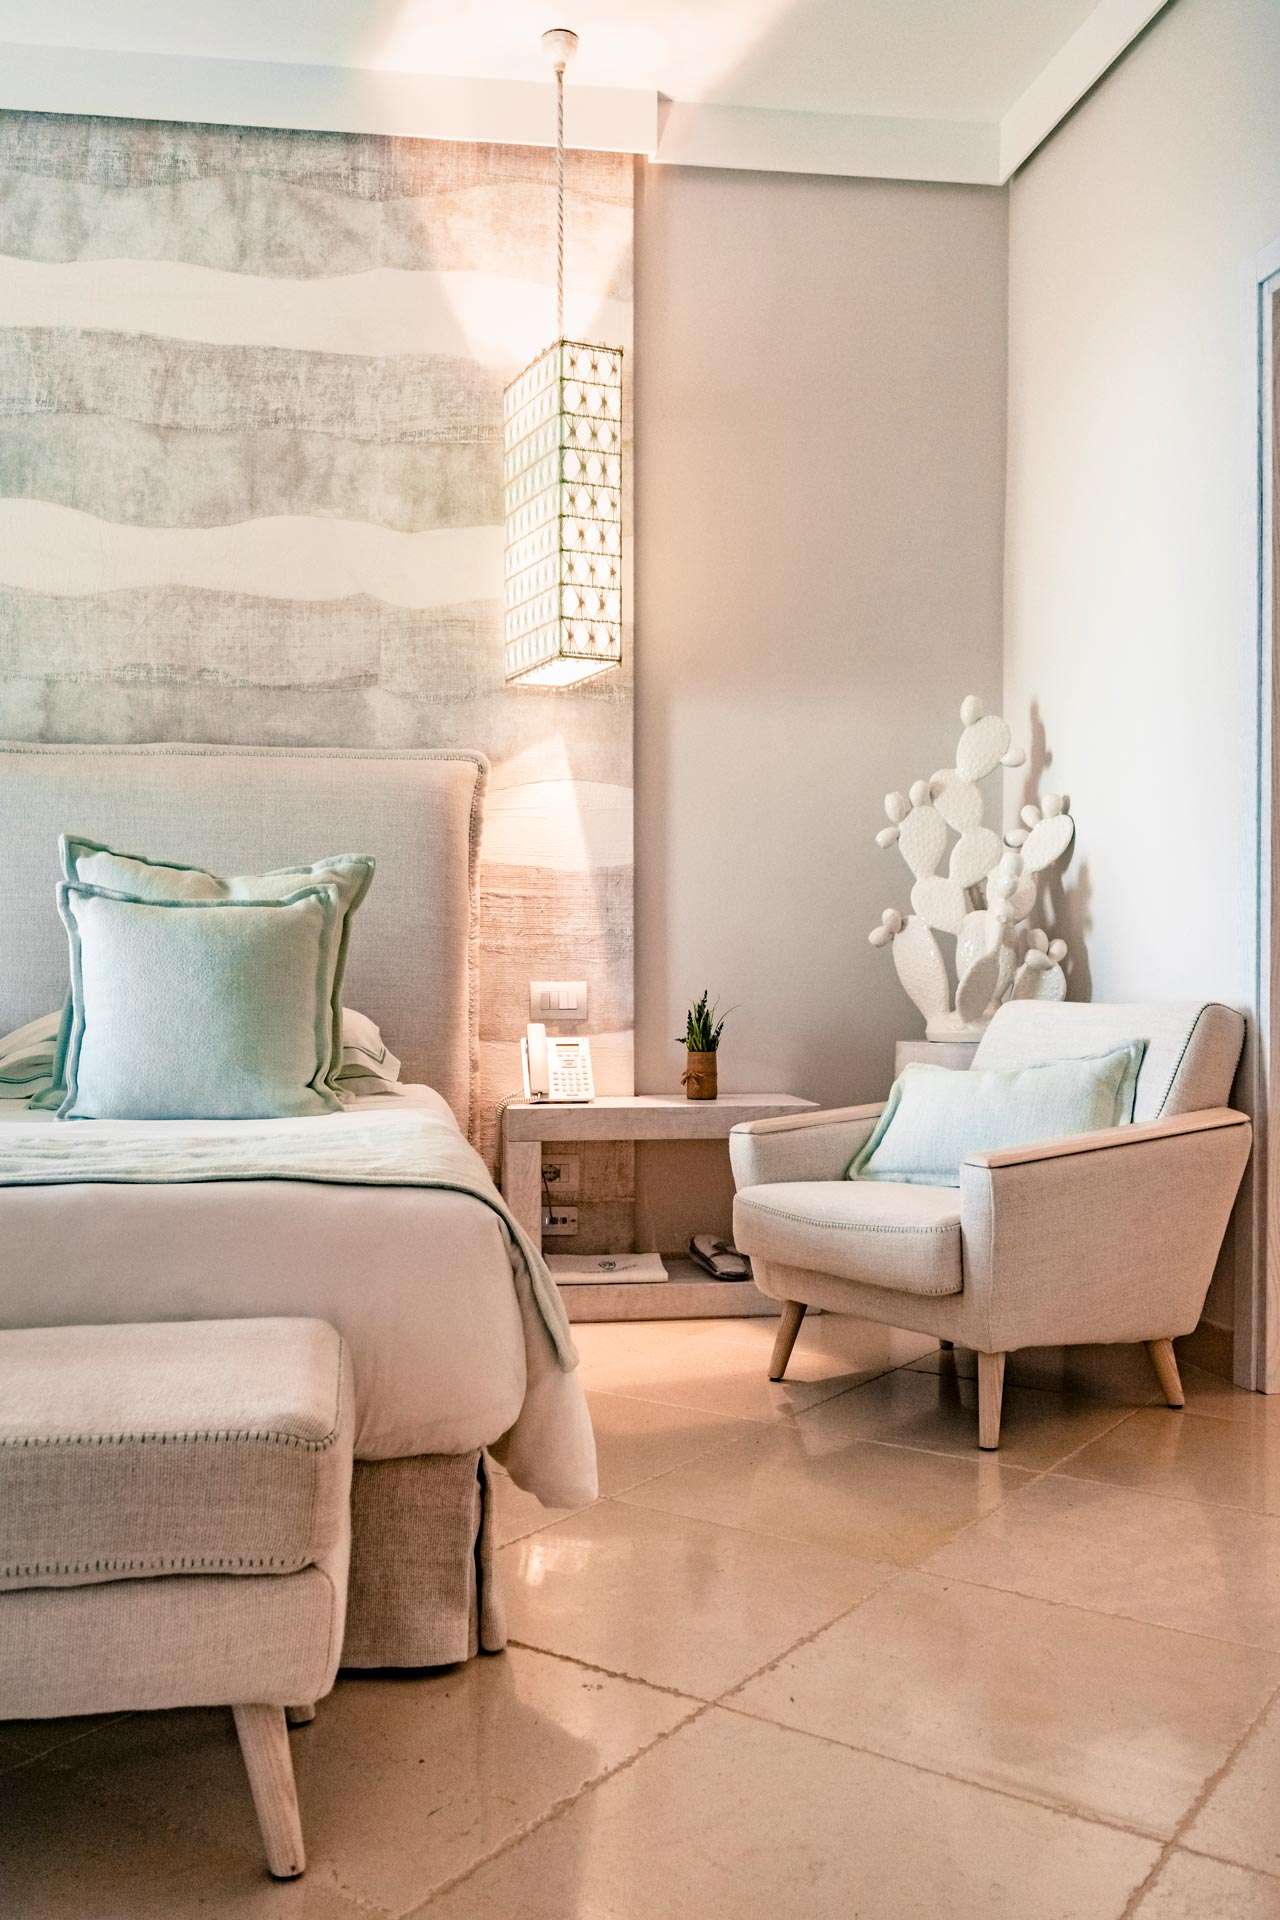 Detail of one of the luxury suites in Polignano a Mare at San Michele Suite